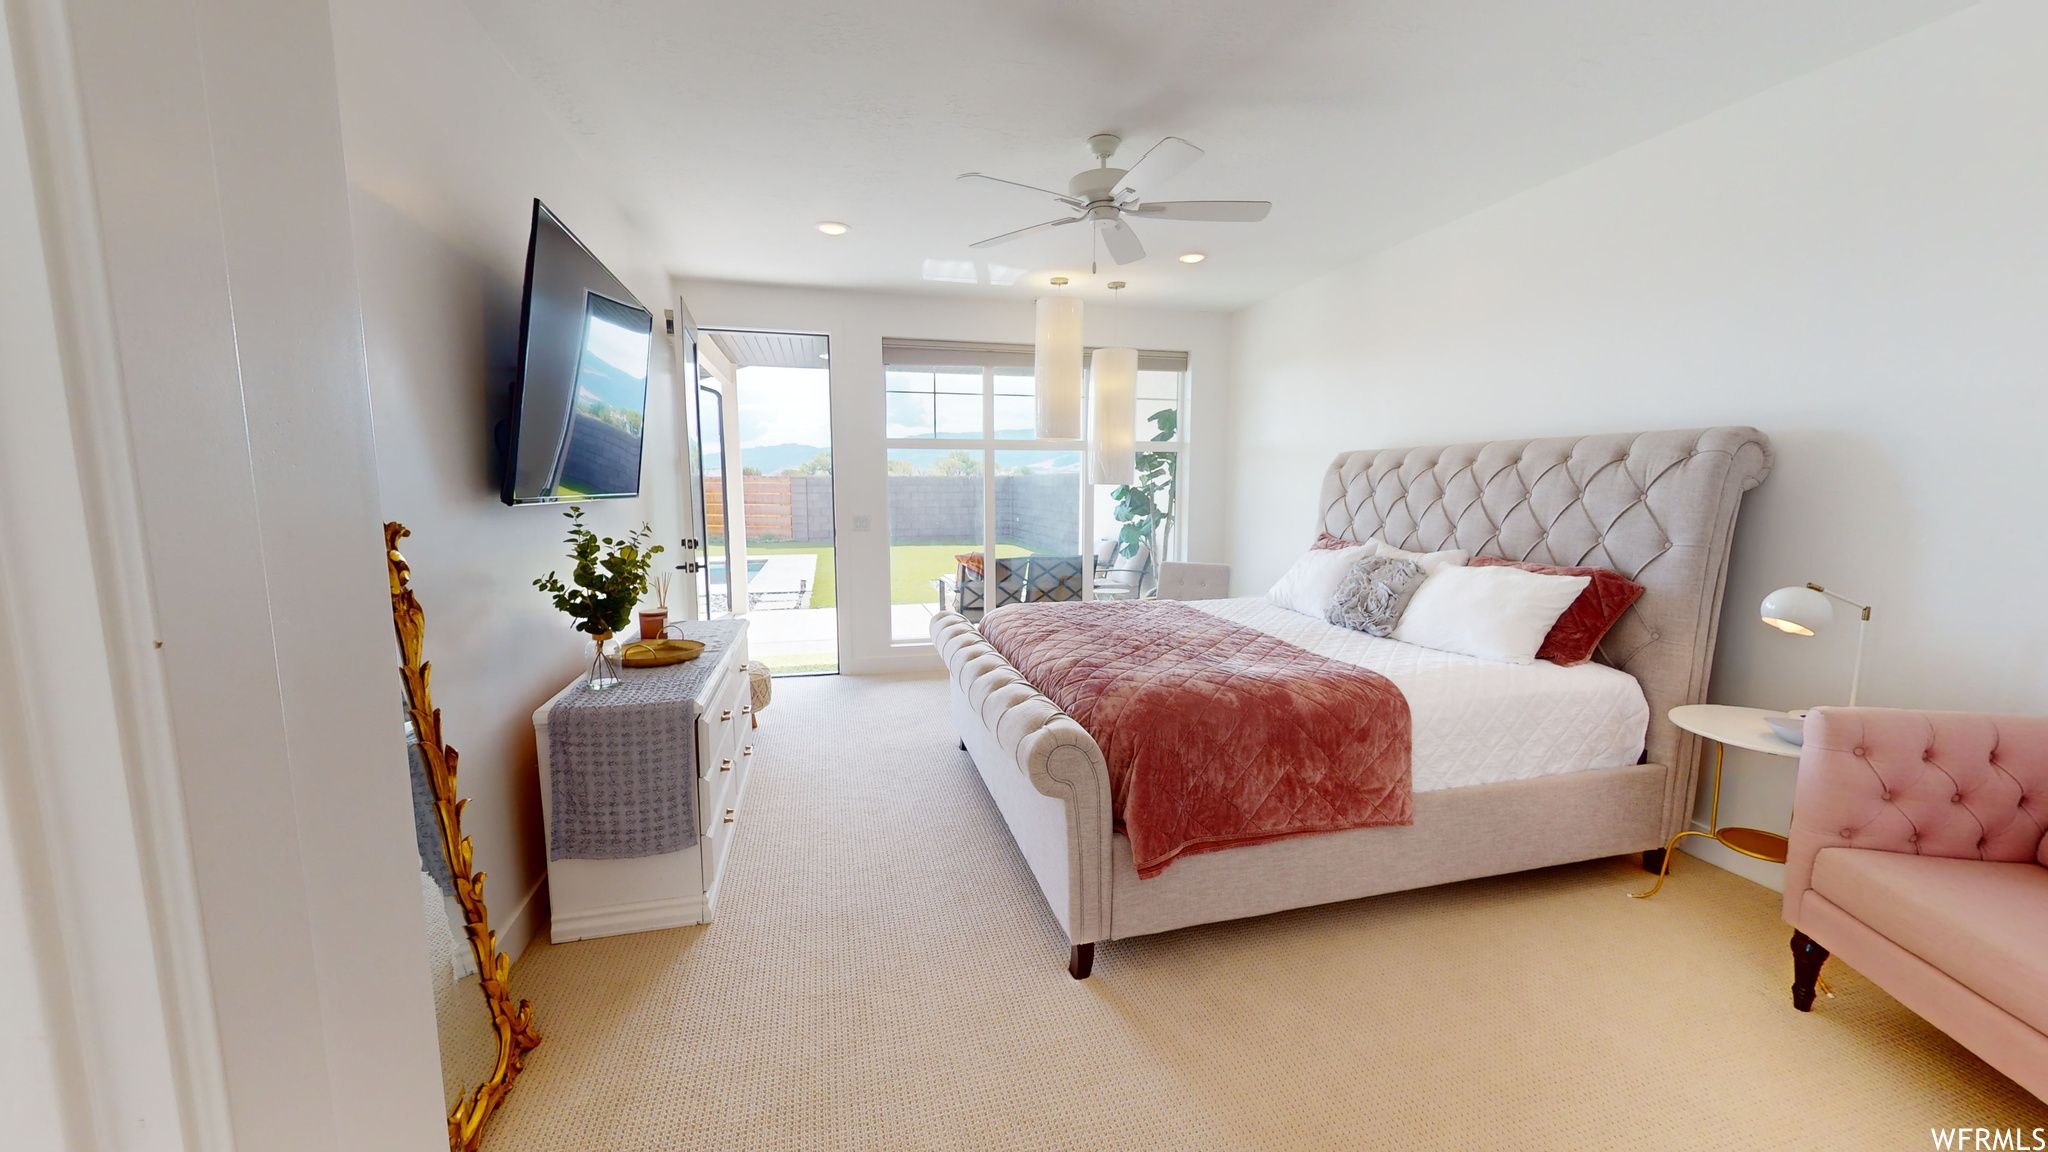 Bedroom with light carpet, ceiling fan, and access to outside